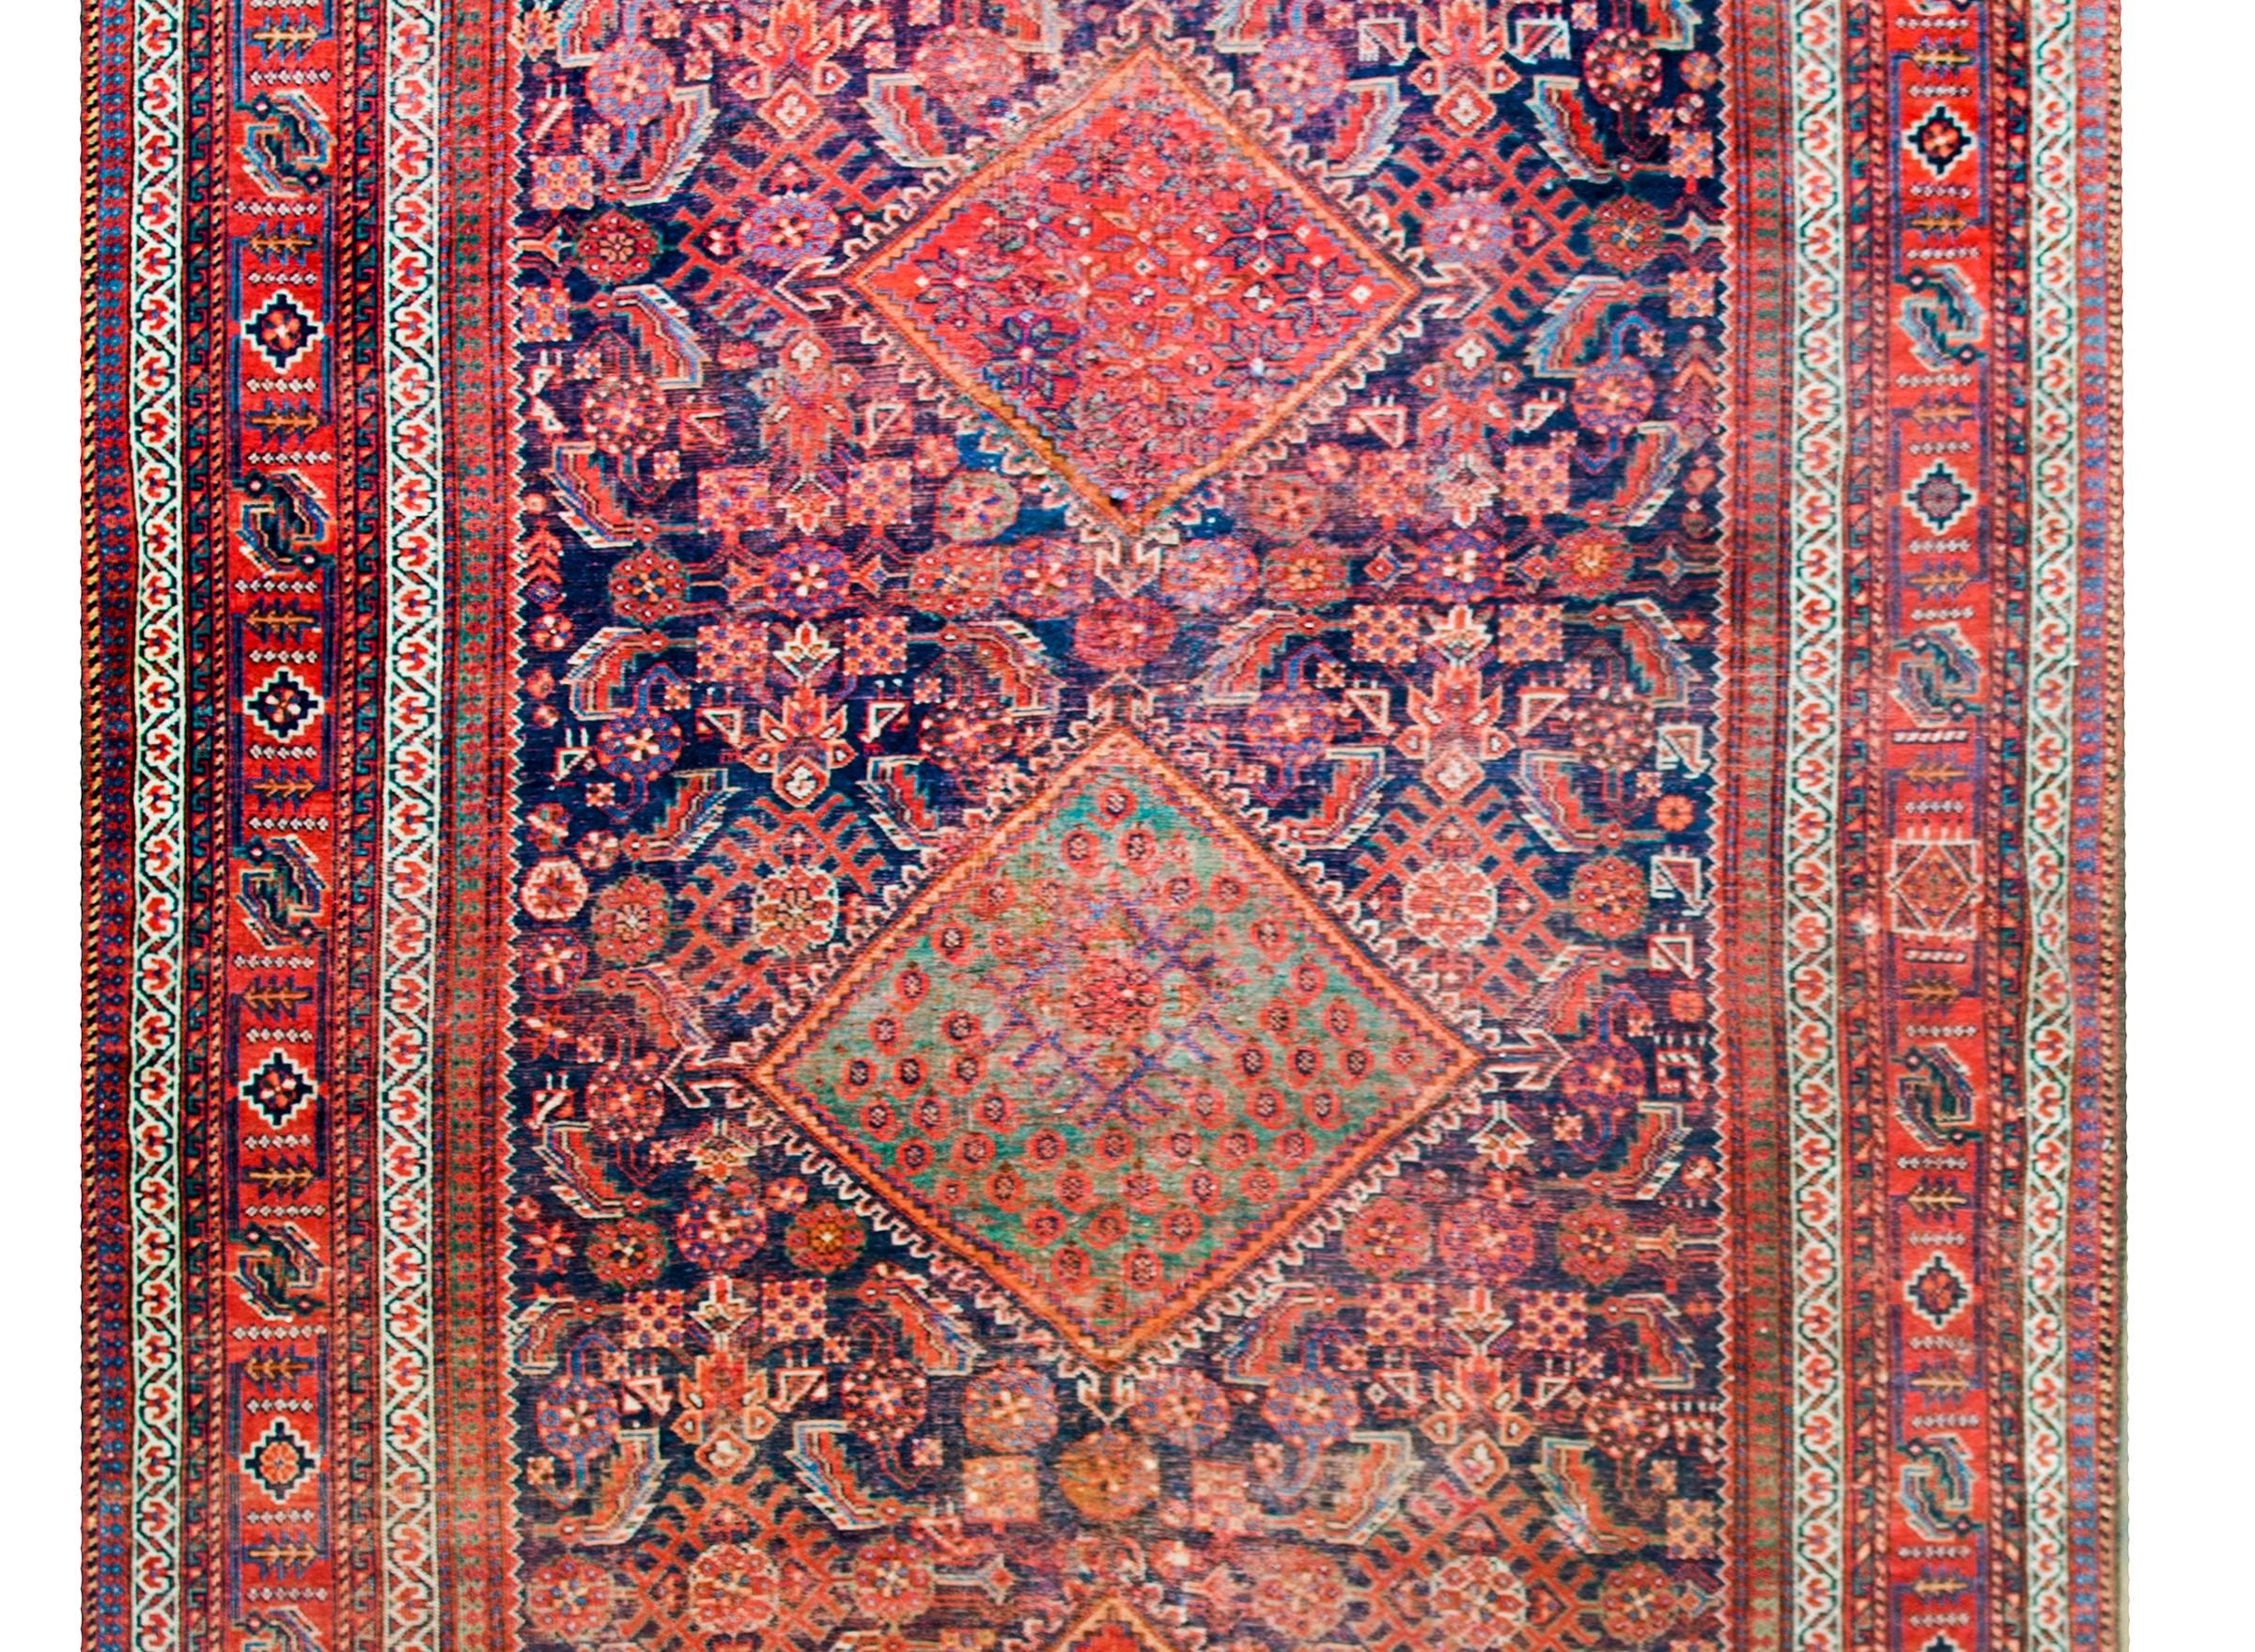 A stunning early 20th century Persian Afshar rug with three large diamond medallions floating amidst a trellis field with stylized flowers and leaves, surrounded by a complex border containing multiple wide and petite stylized floral patterned